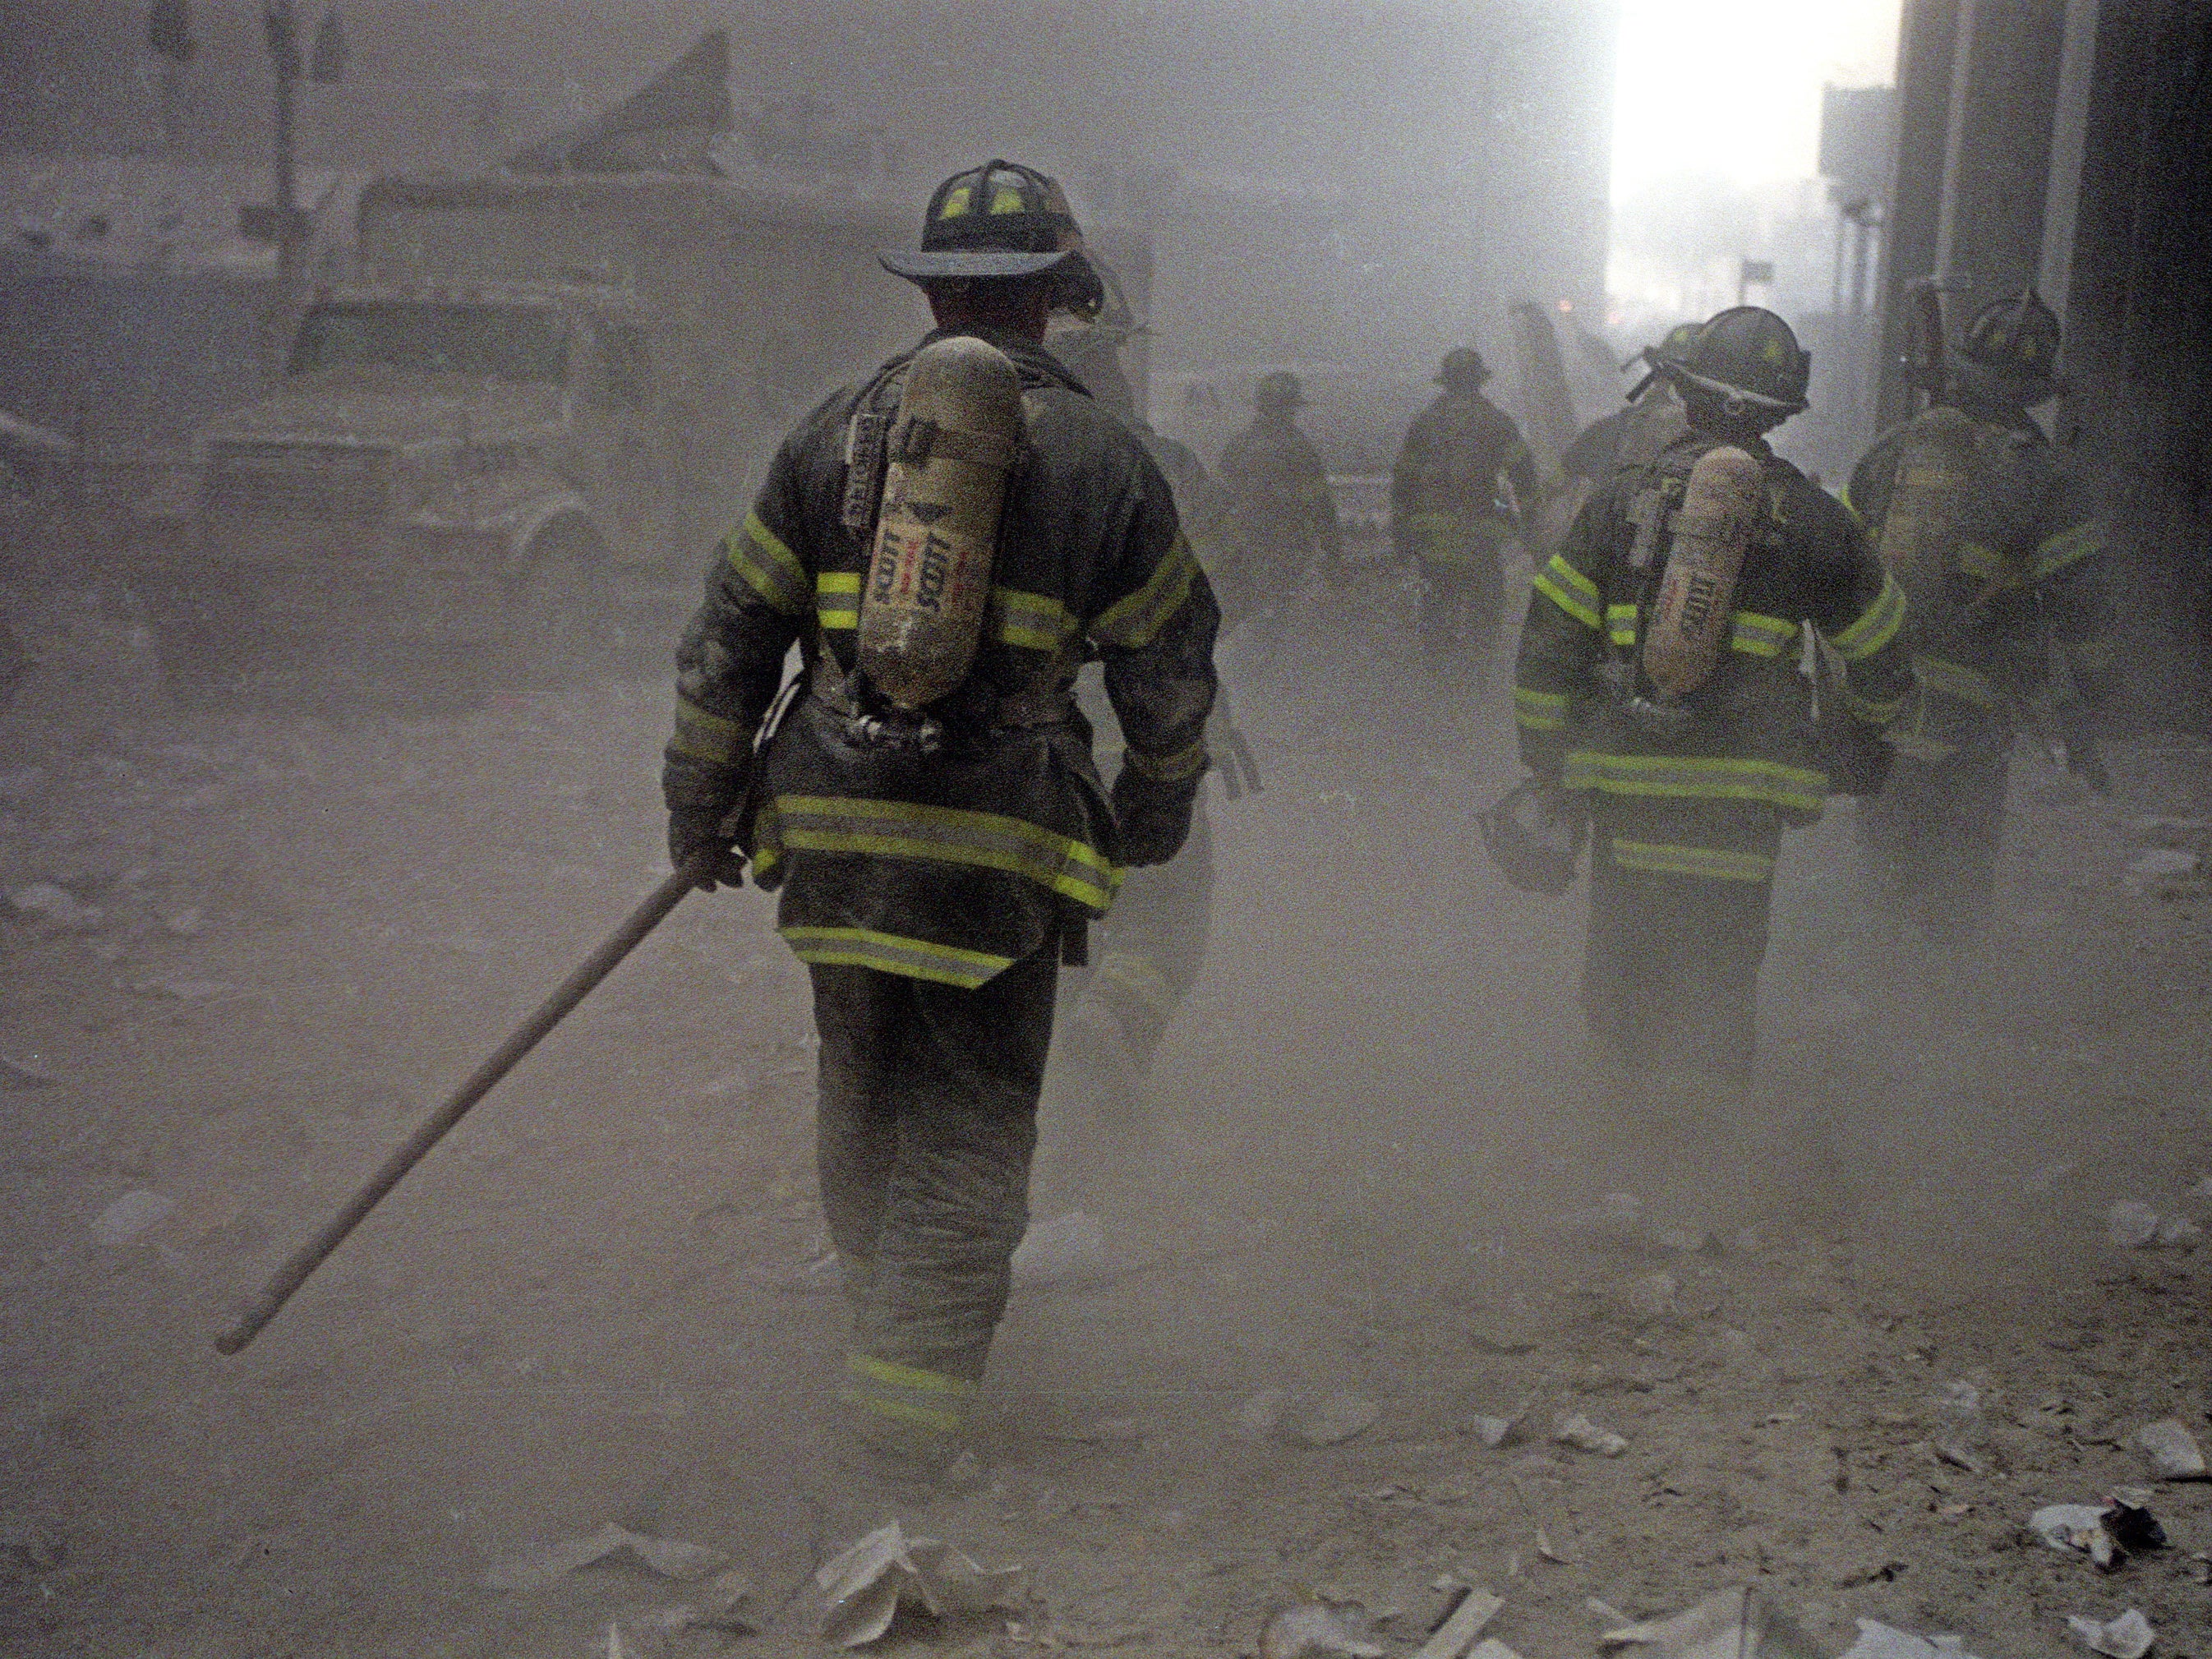 The firefighters were a symbol of New York's recovery after 9/11